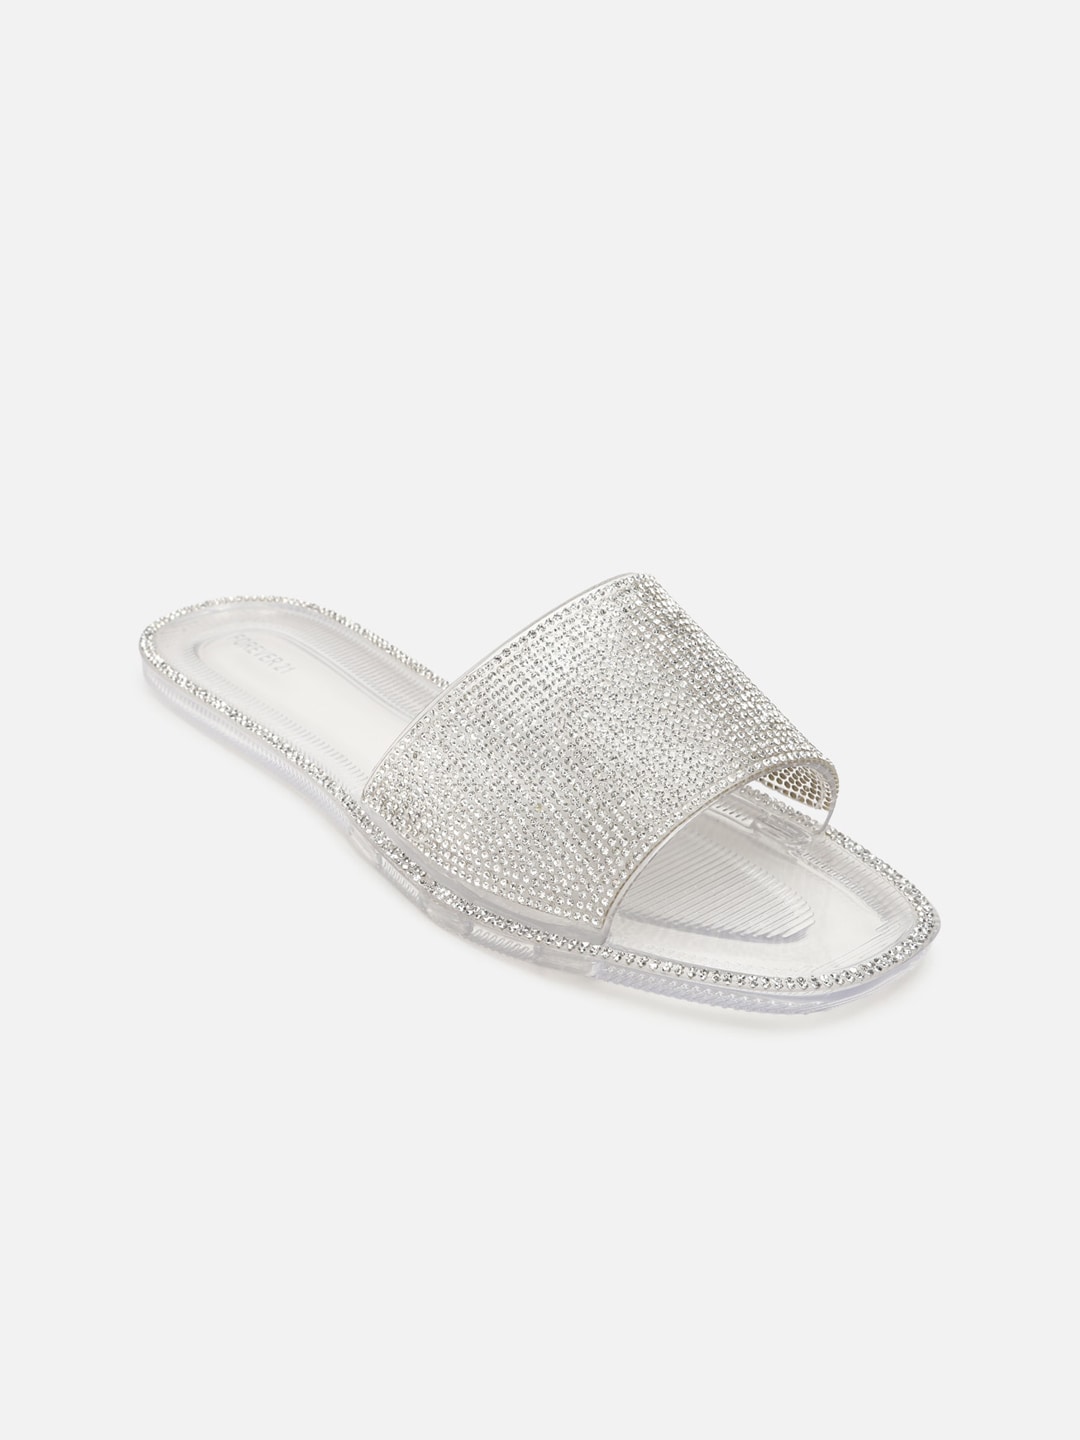 FOREVER 21 Women Silver-Toned Textured Flats Price in India